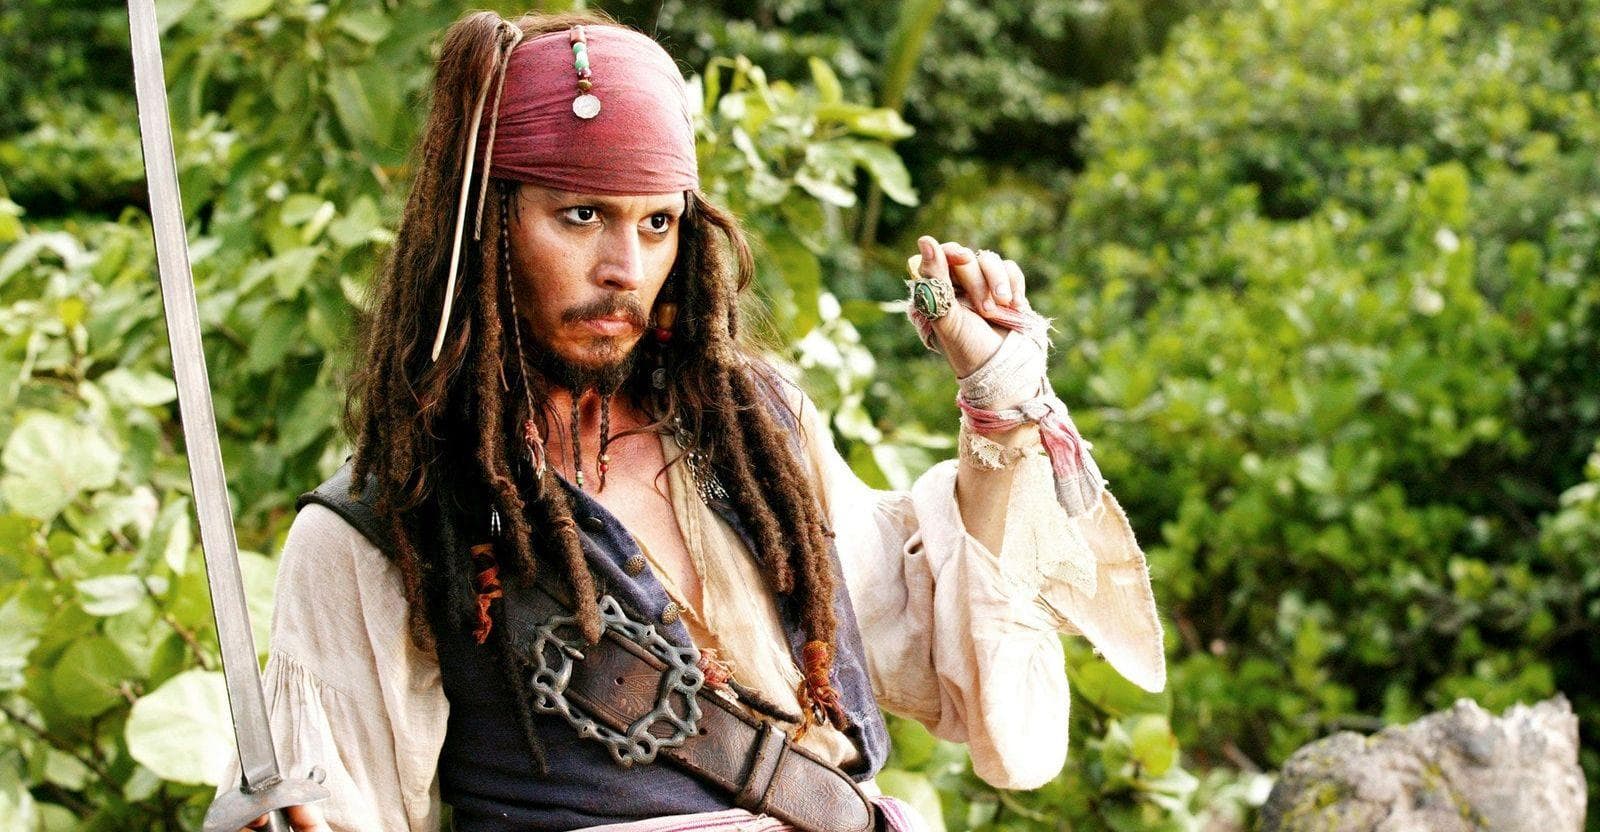 Random Small But Clever Details From The 'Pirates Of The Caribbean' Movies